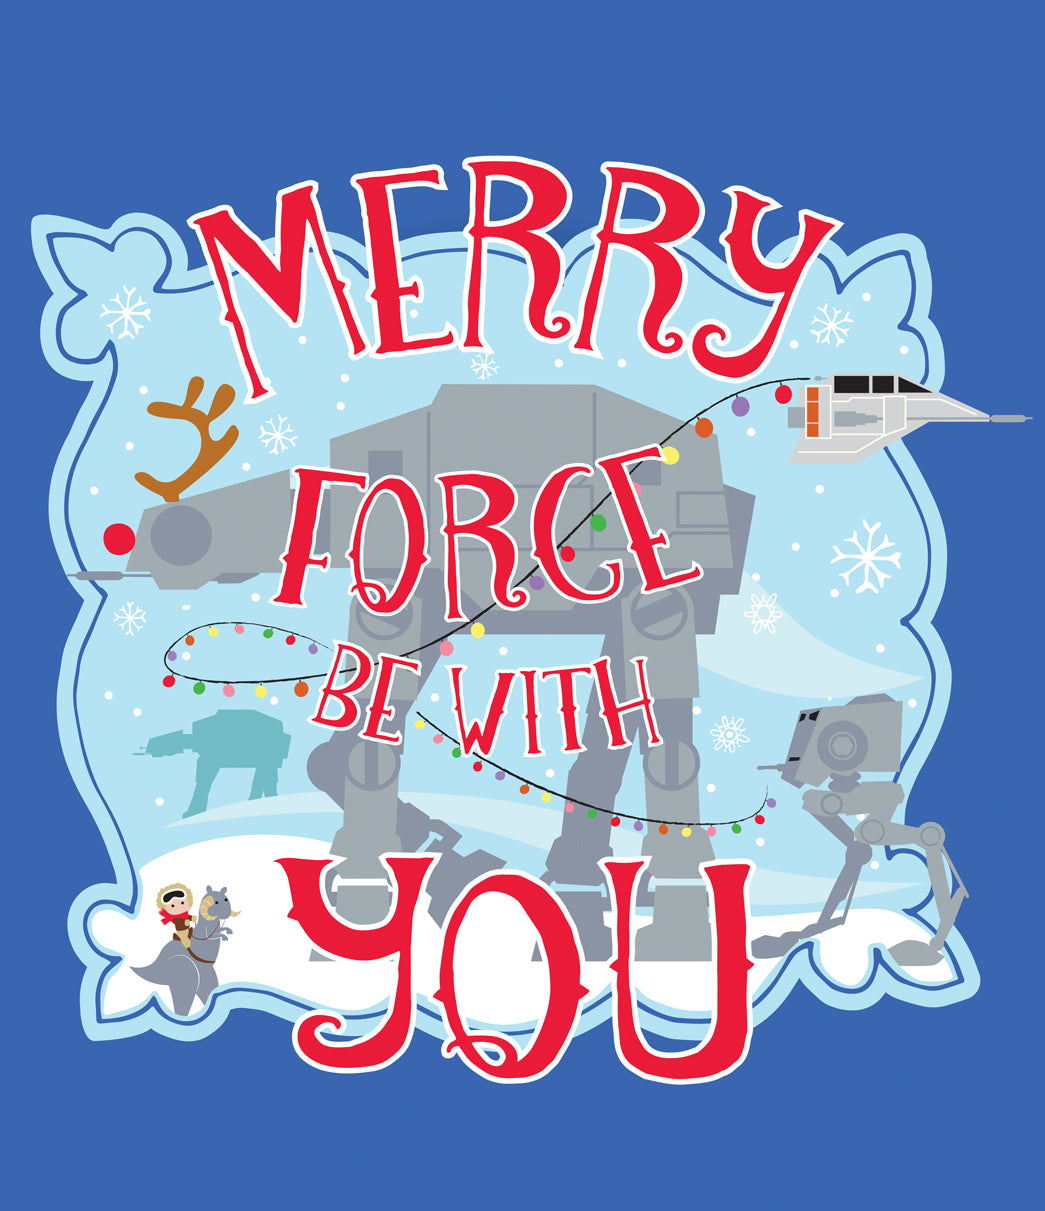 Merry Force Be With You